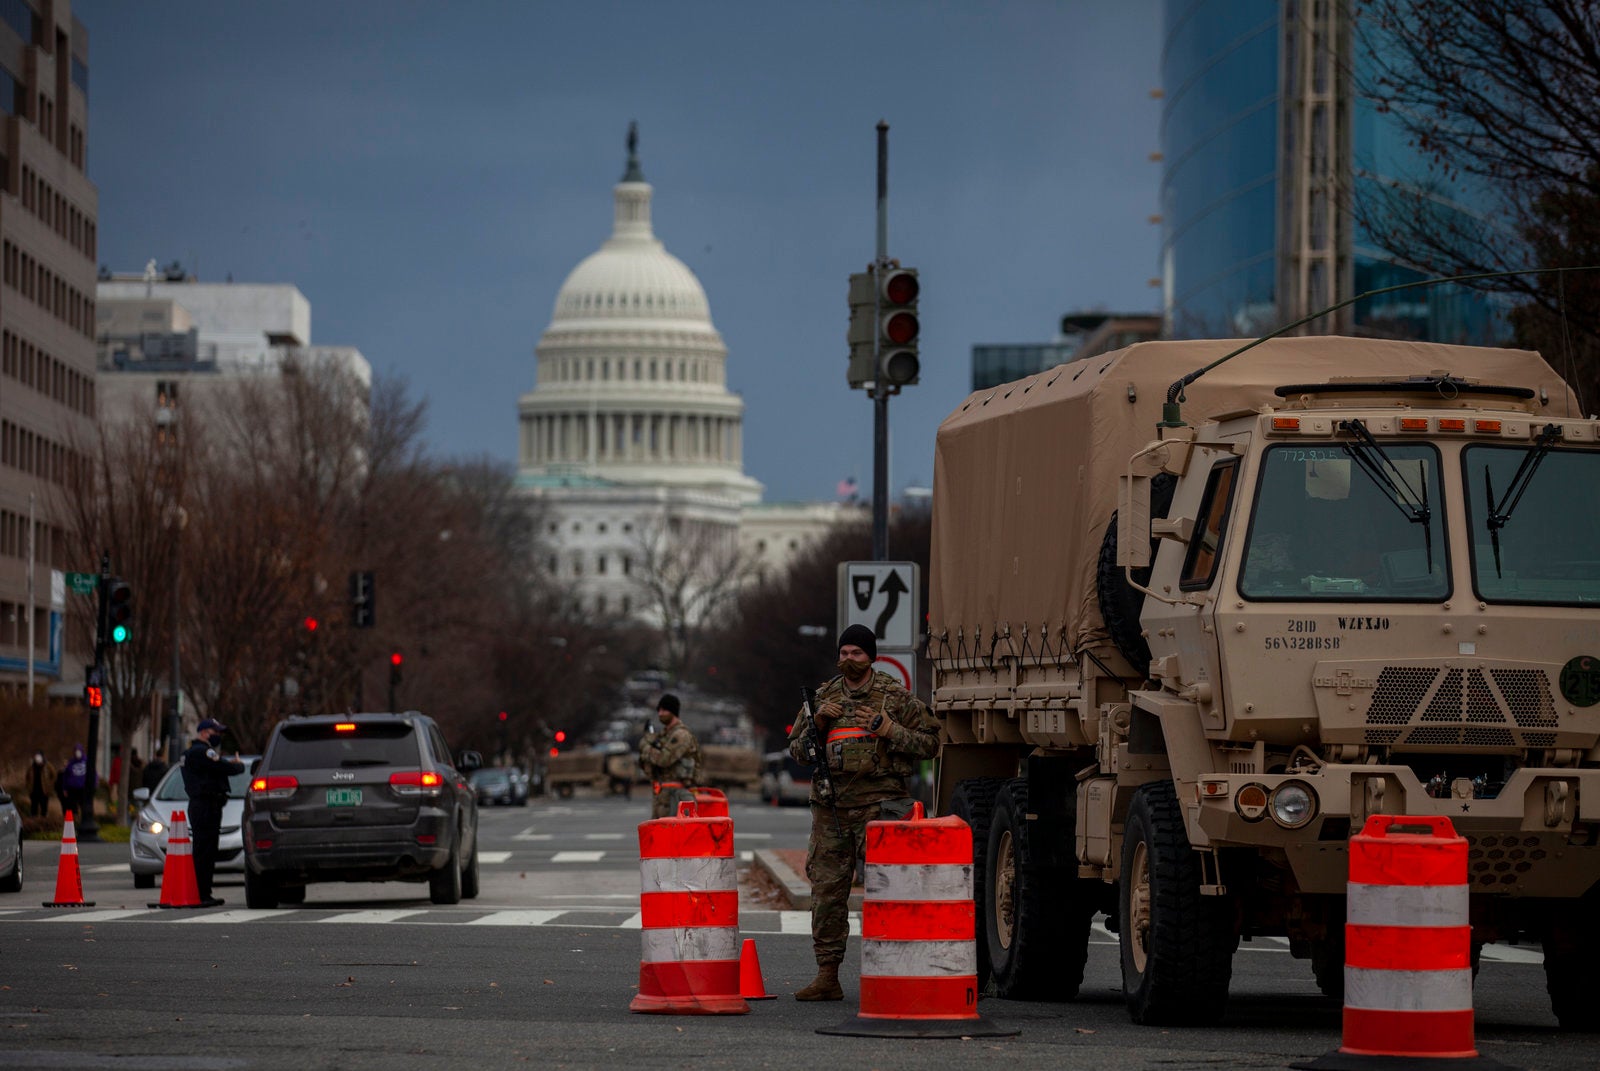 A military vehicle and orange traffic cones are pictured in front of the U.S. Capitol